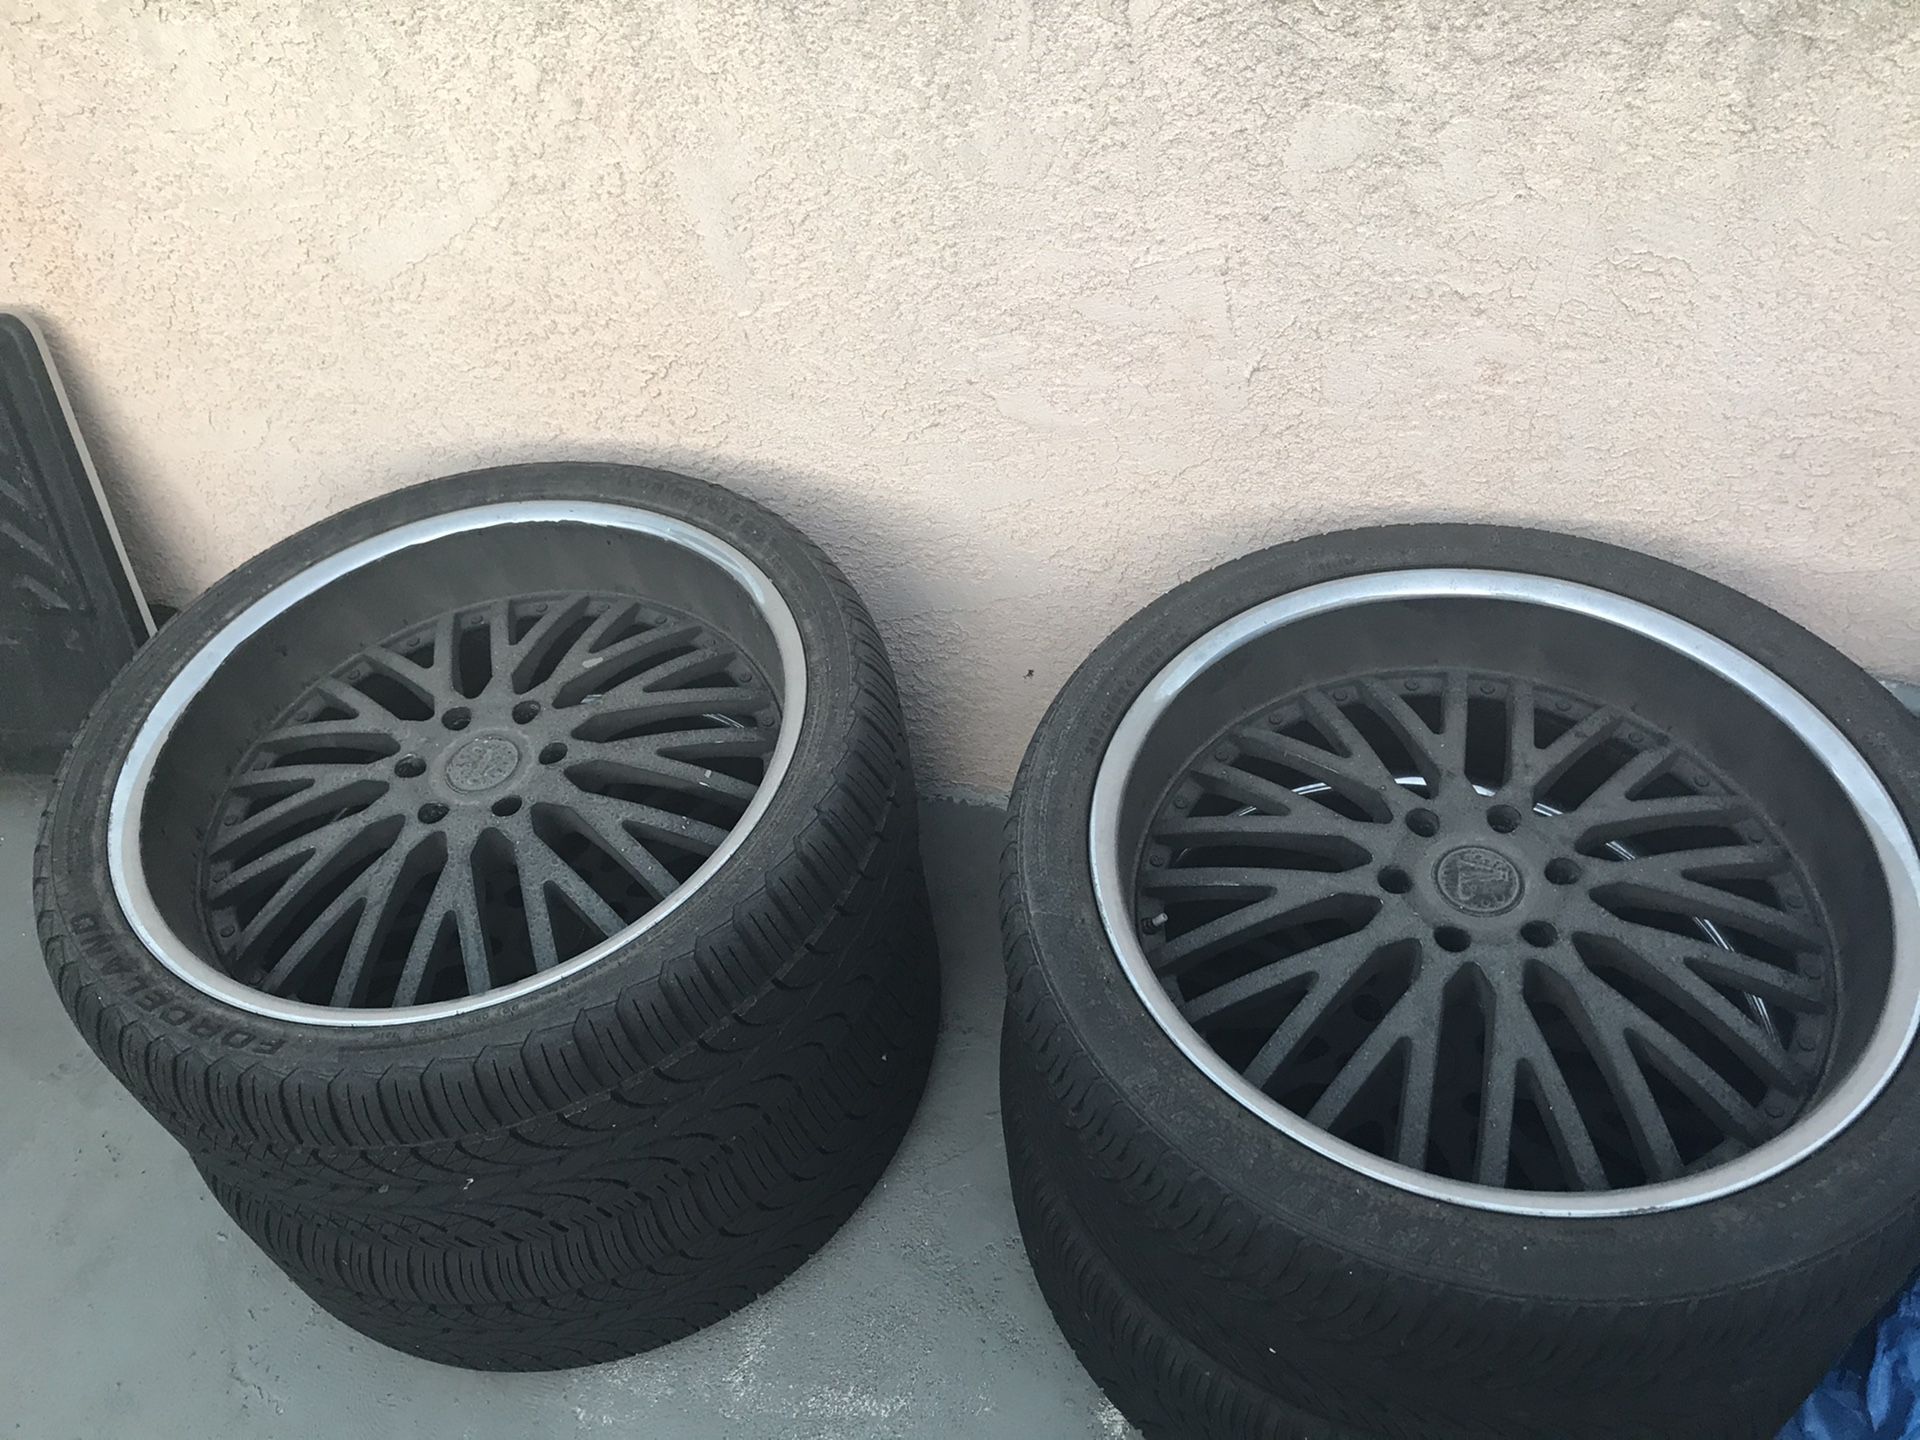 Velocity Rims 24” 6 Lug from a Chevy Avalanche